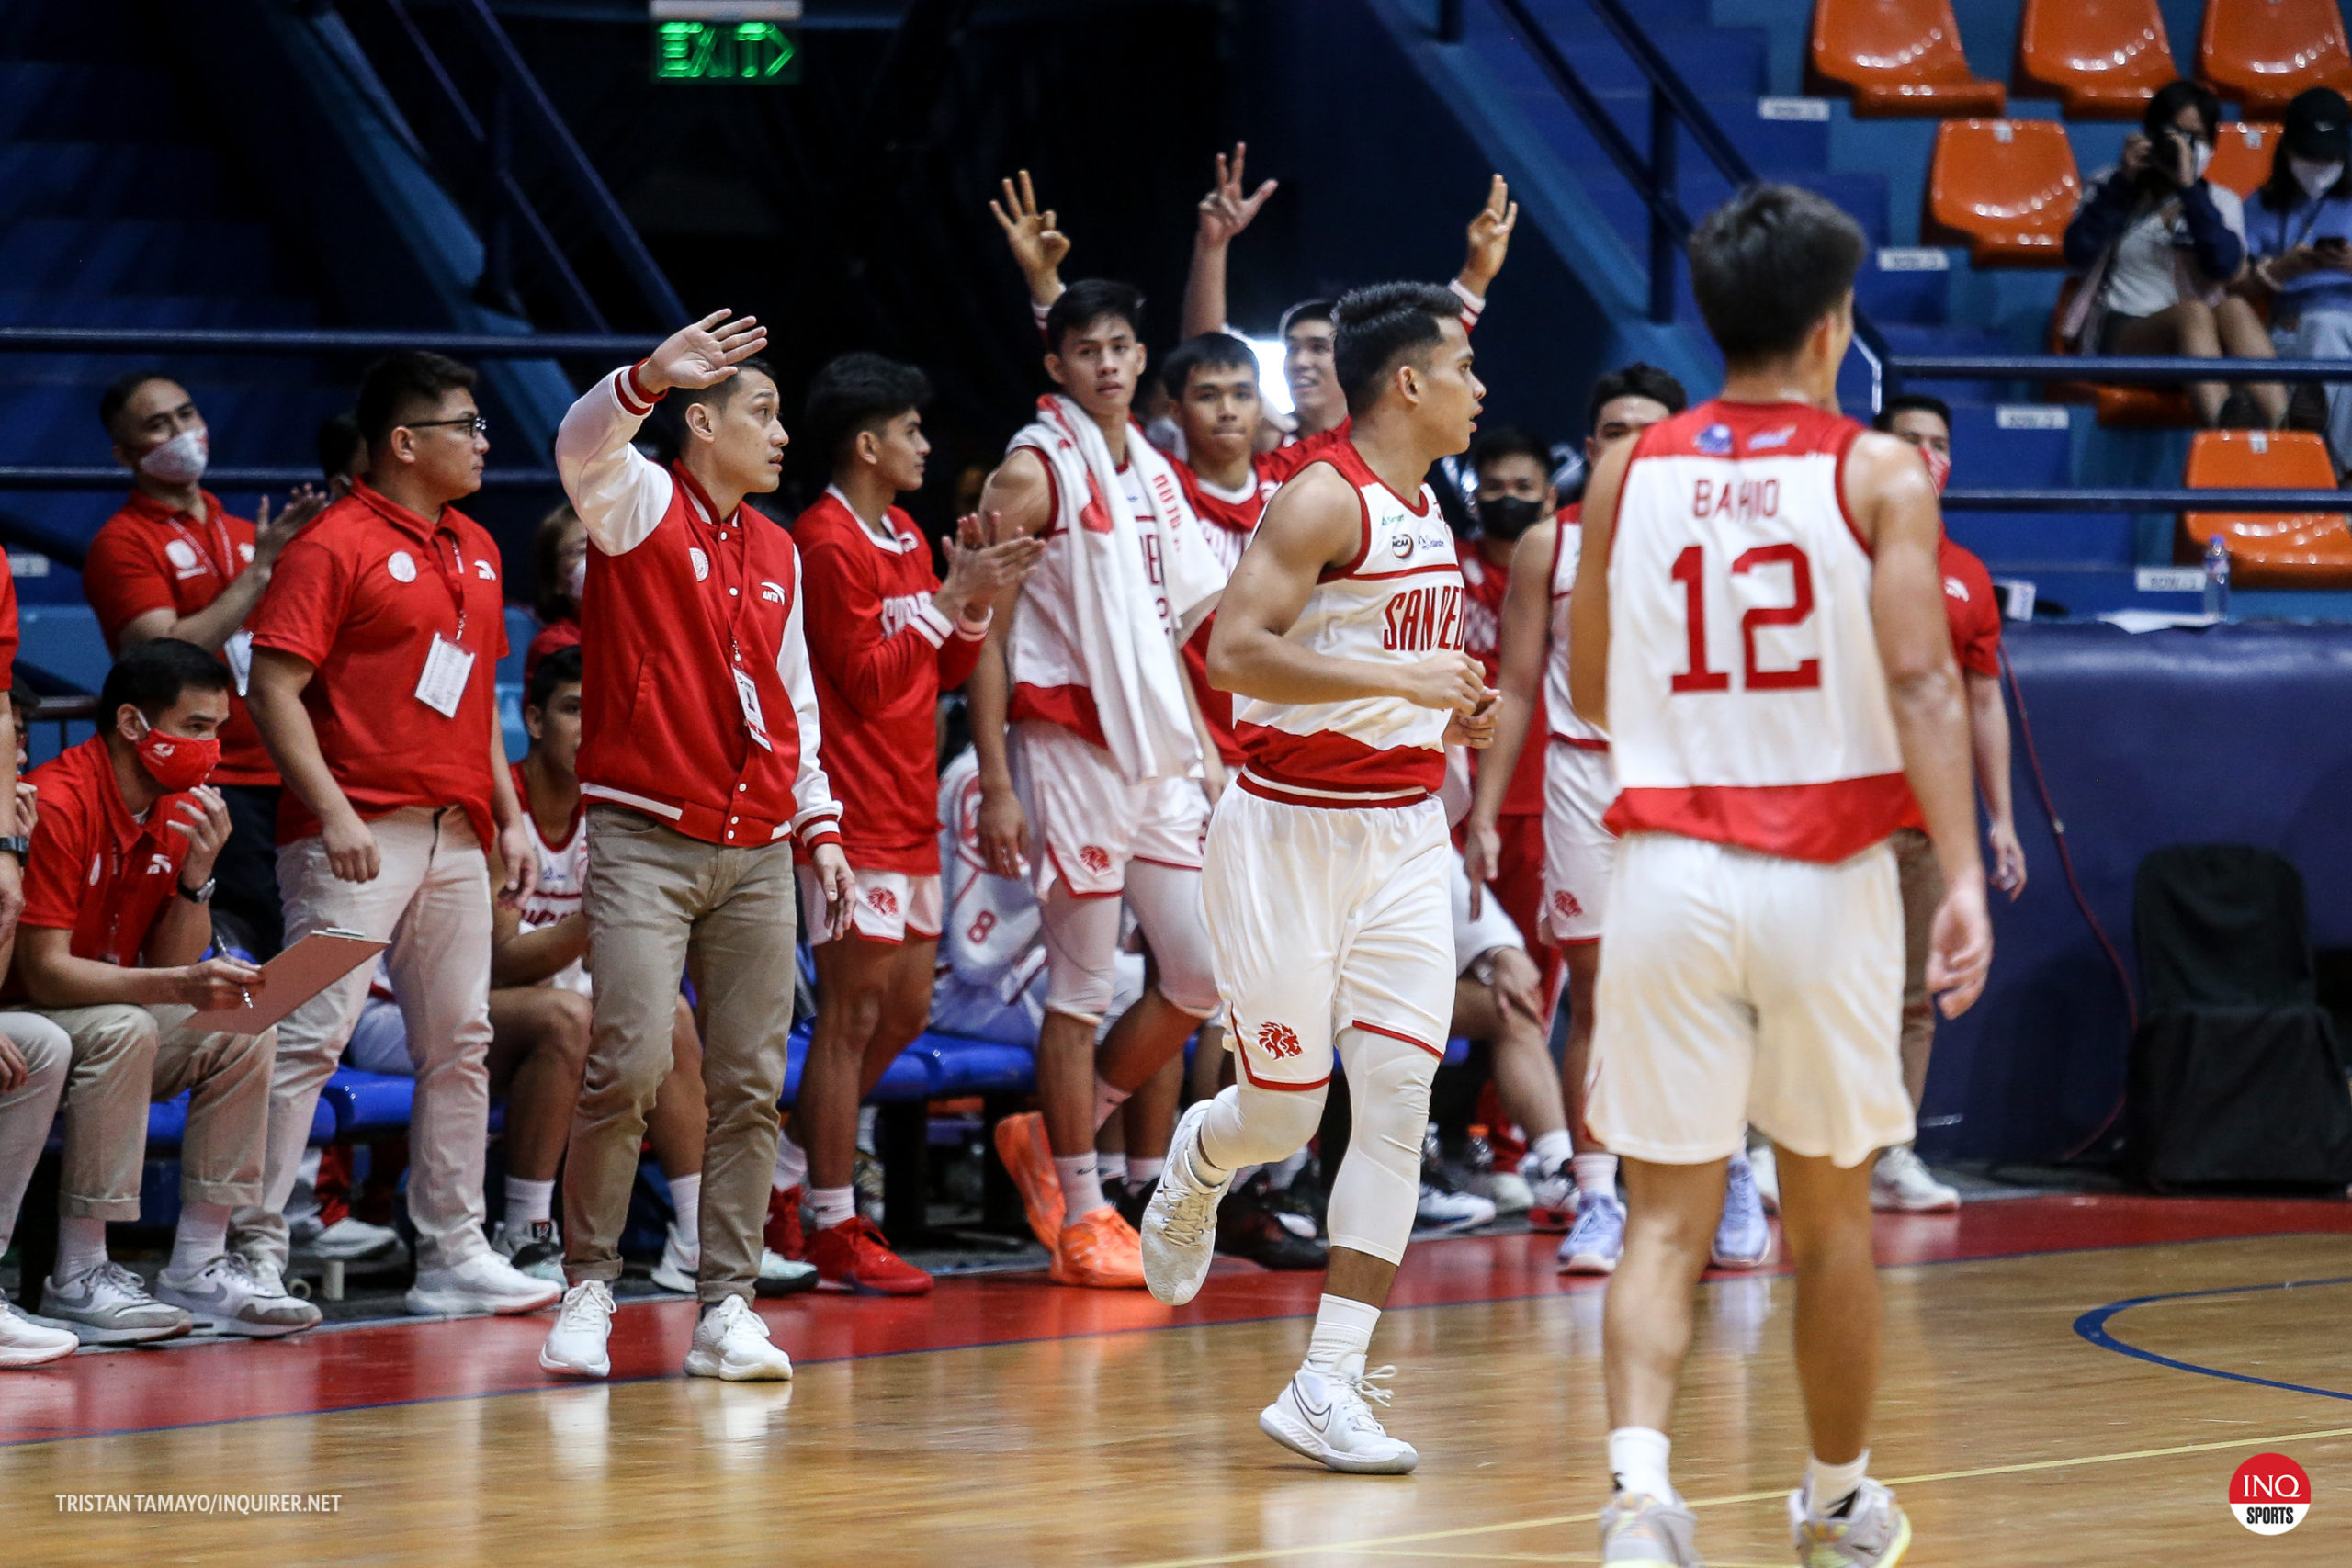 SAN BEDA RED LIONS. 